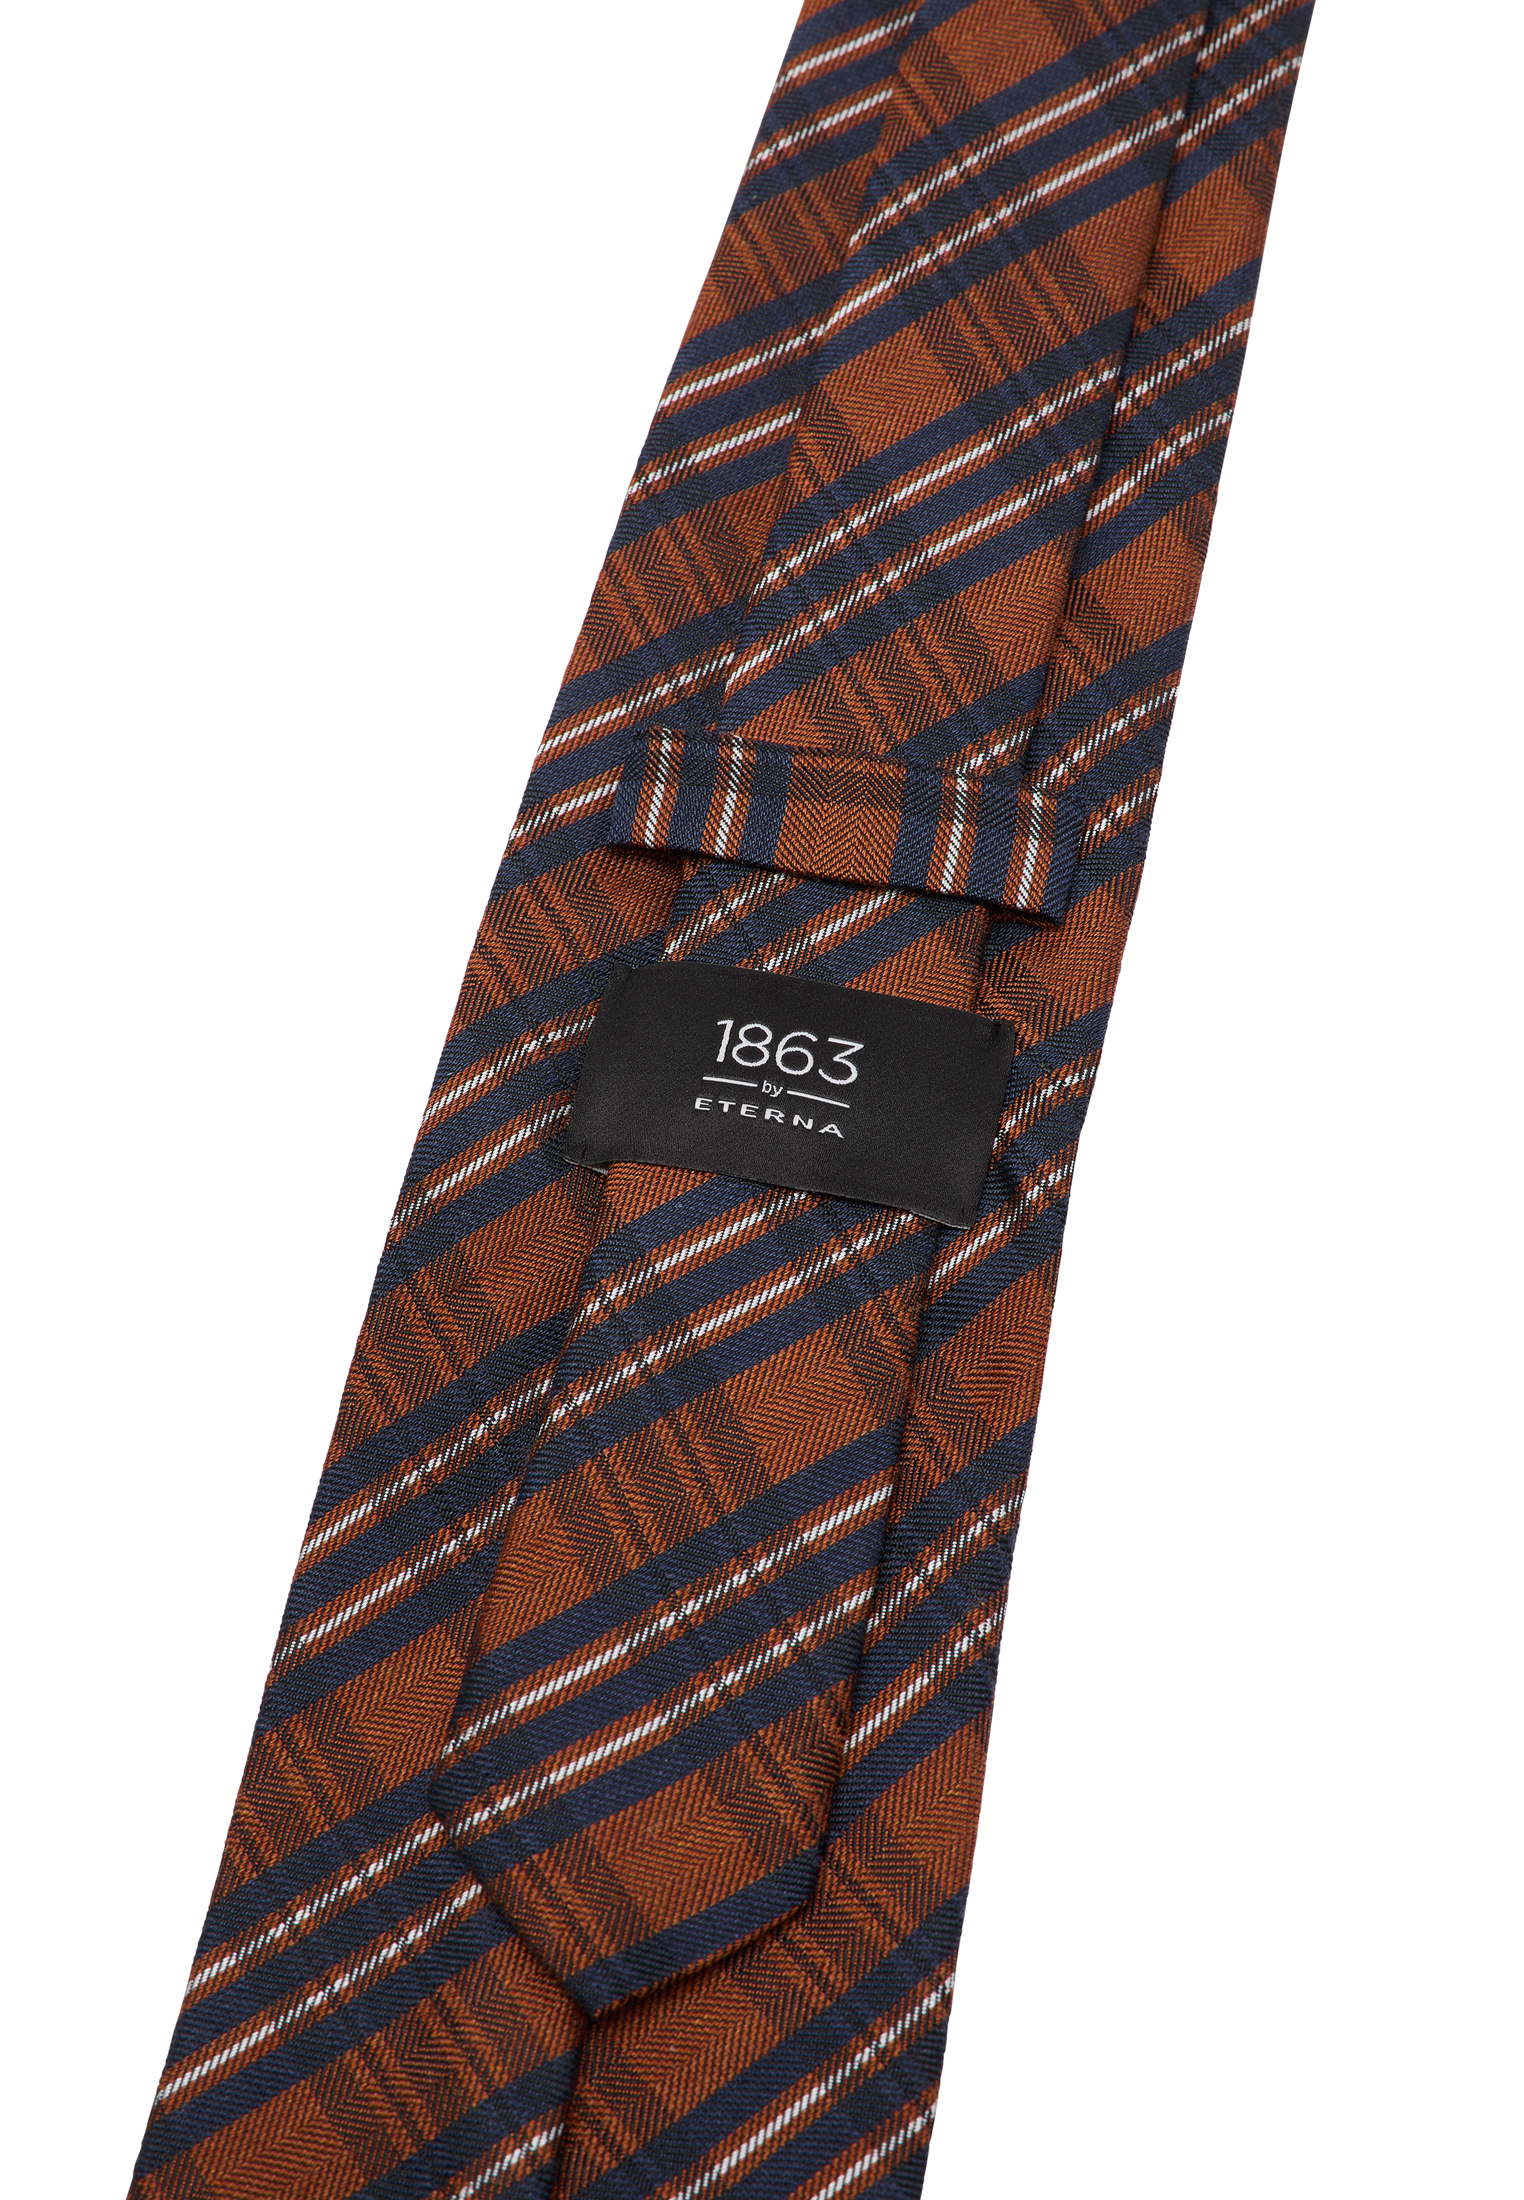 | 142 in brown | | 1AC01934-02-91-142 brown checkered Tie